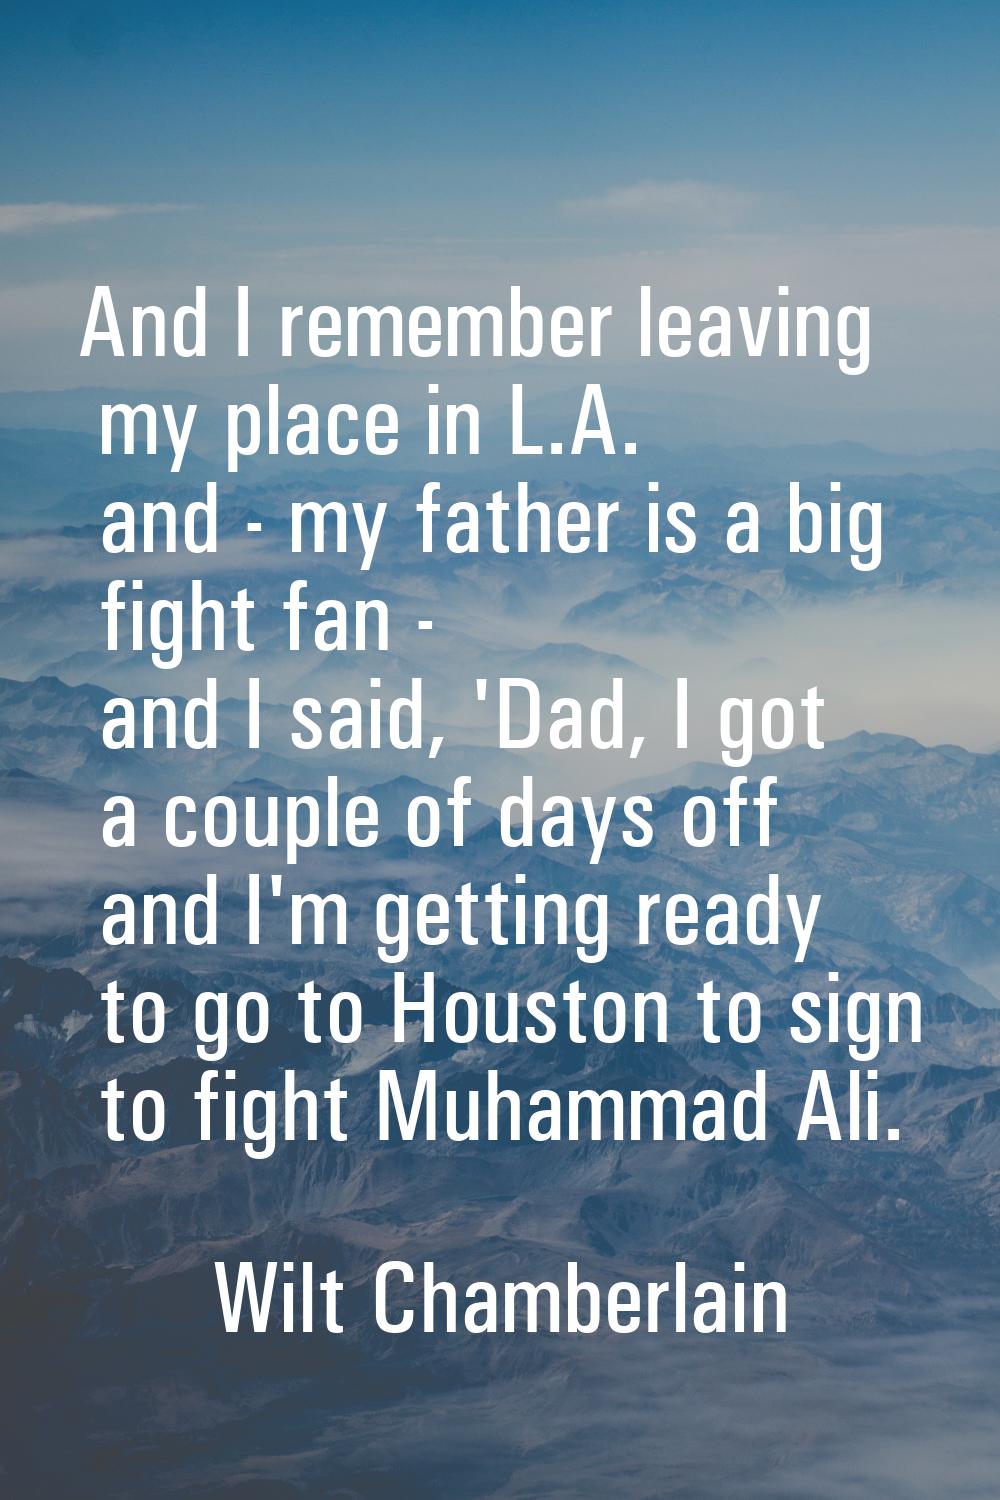 And I remember leaving my place in L.A. and - my father is a big fight fan - and I said, 'Dad, I go